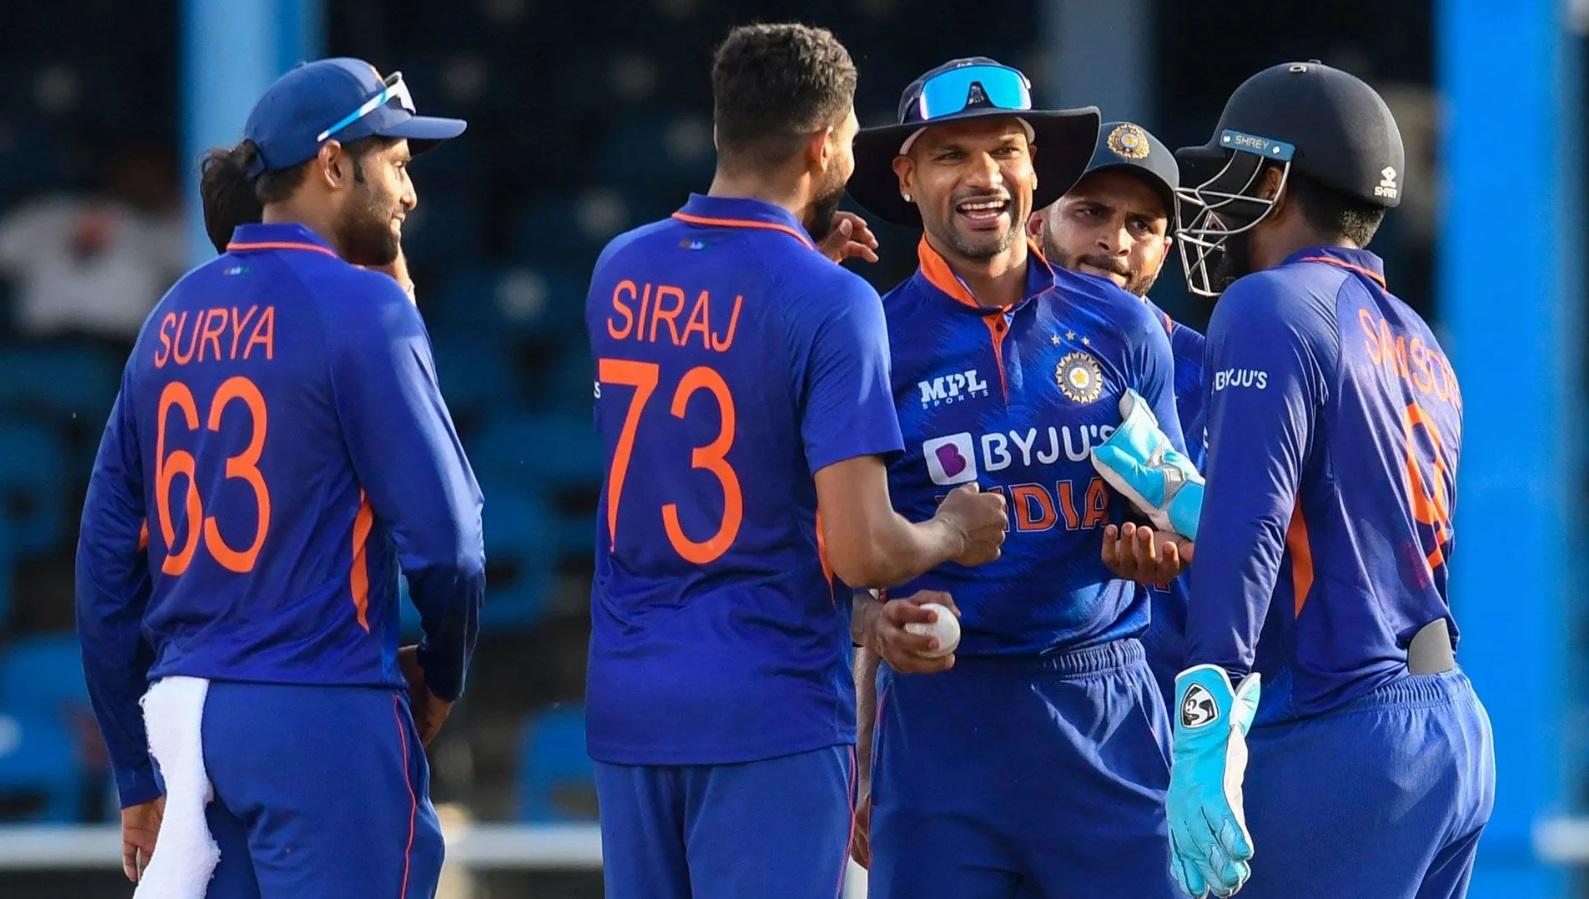 ICC ODI Rankings | India strengthen third place after clean sweeping West Indies; New Zealand remain at top